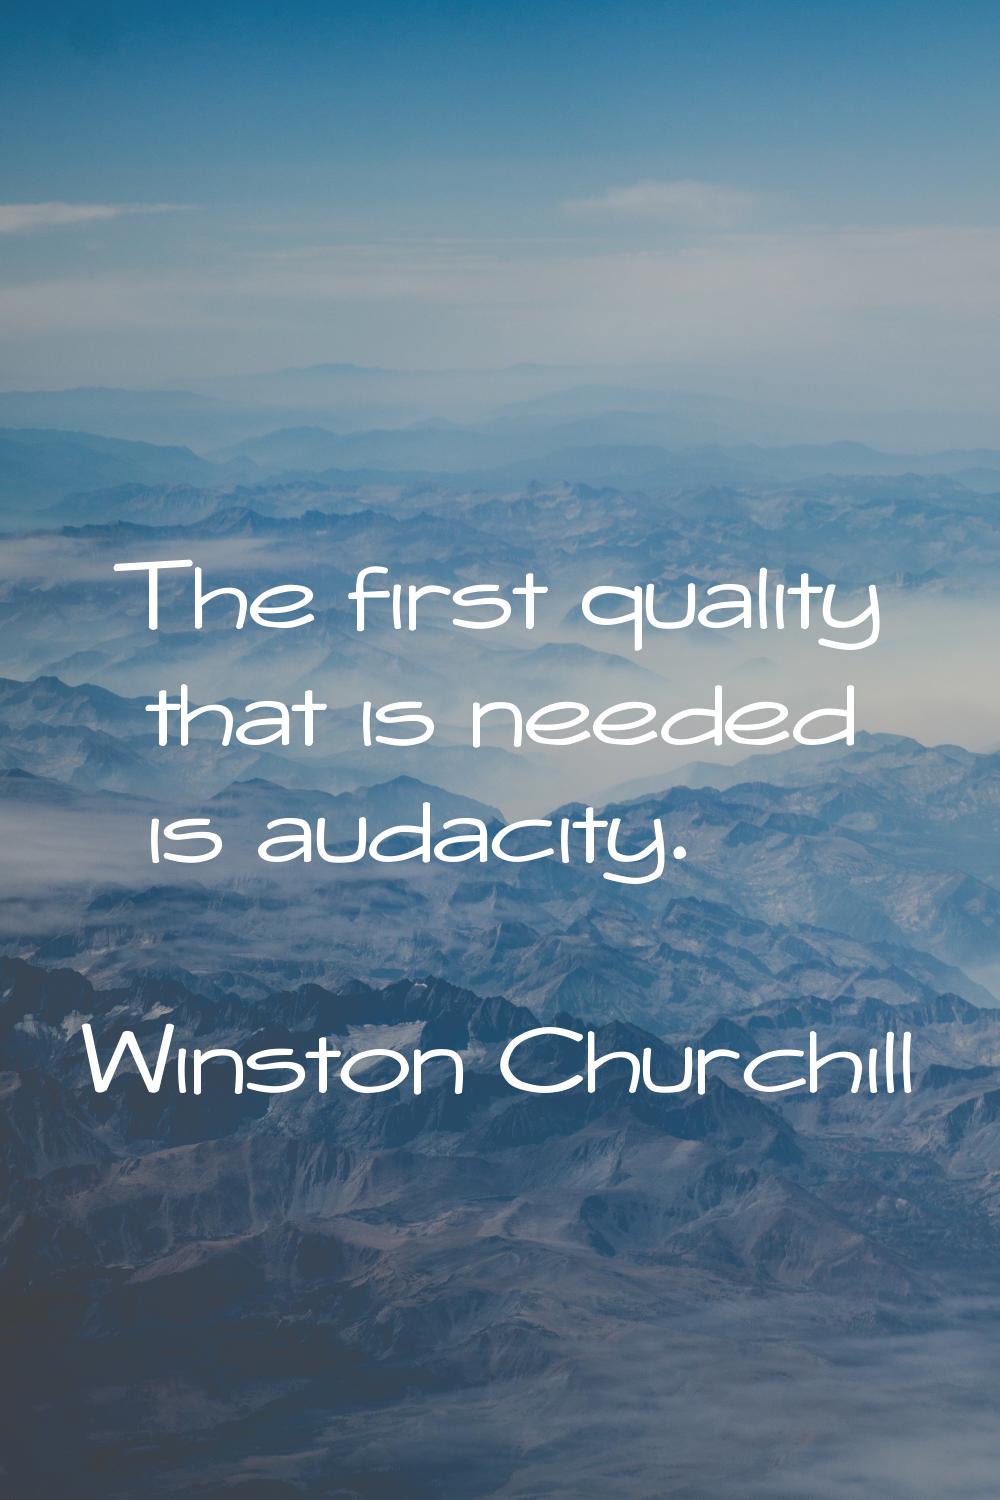 The first quality that is needed is audacity.